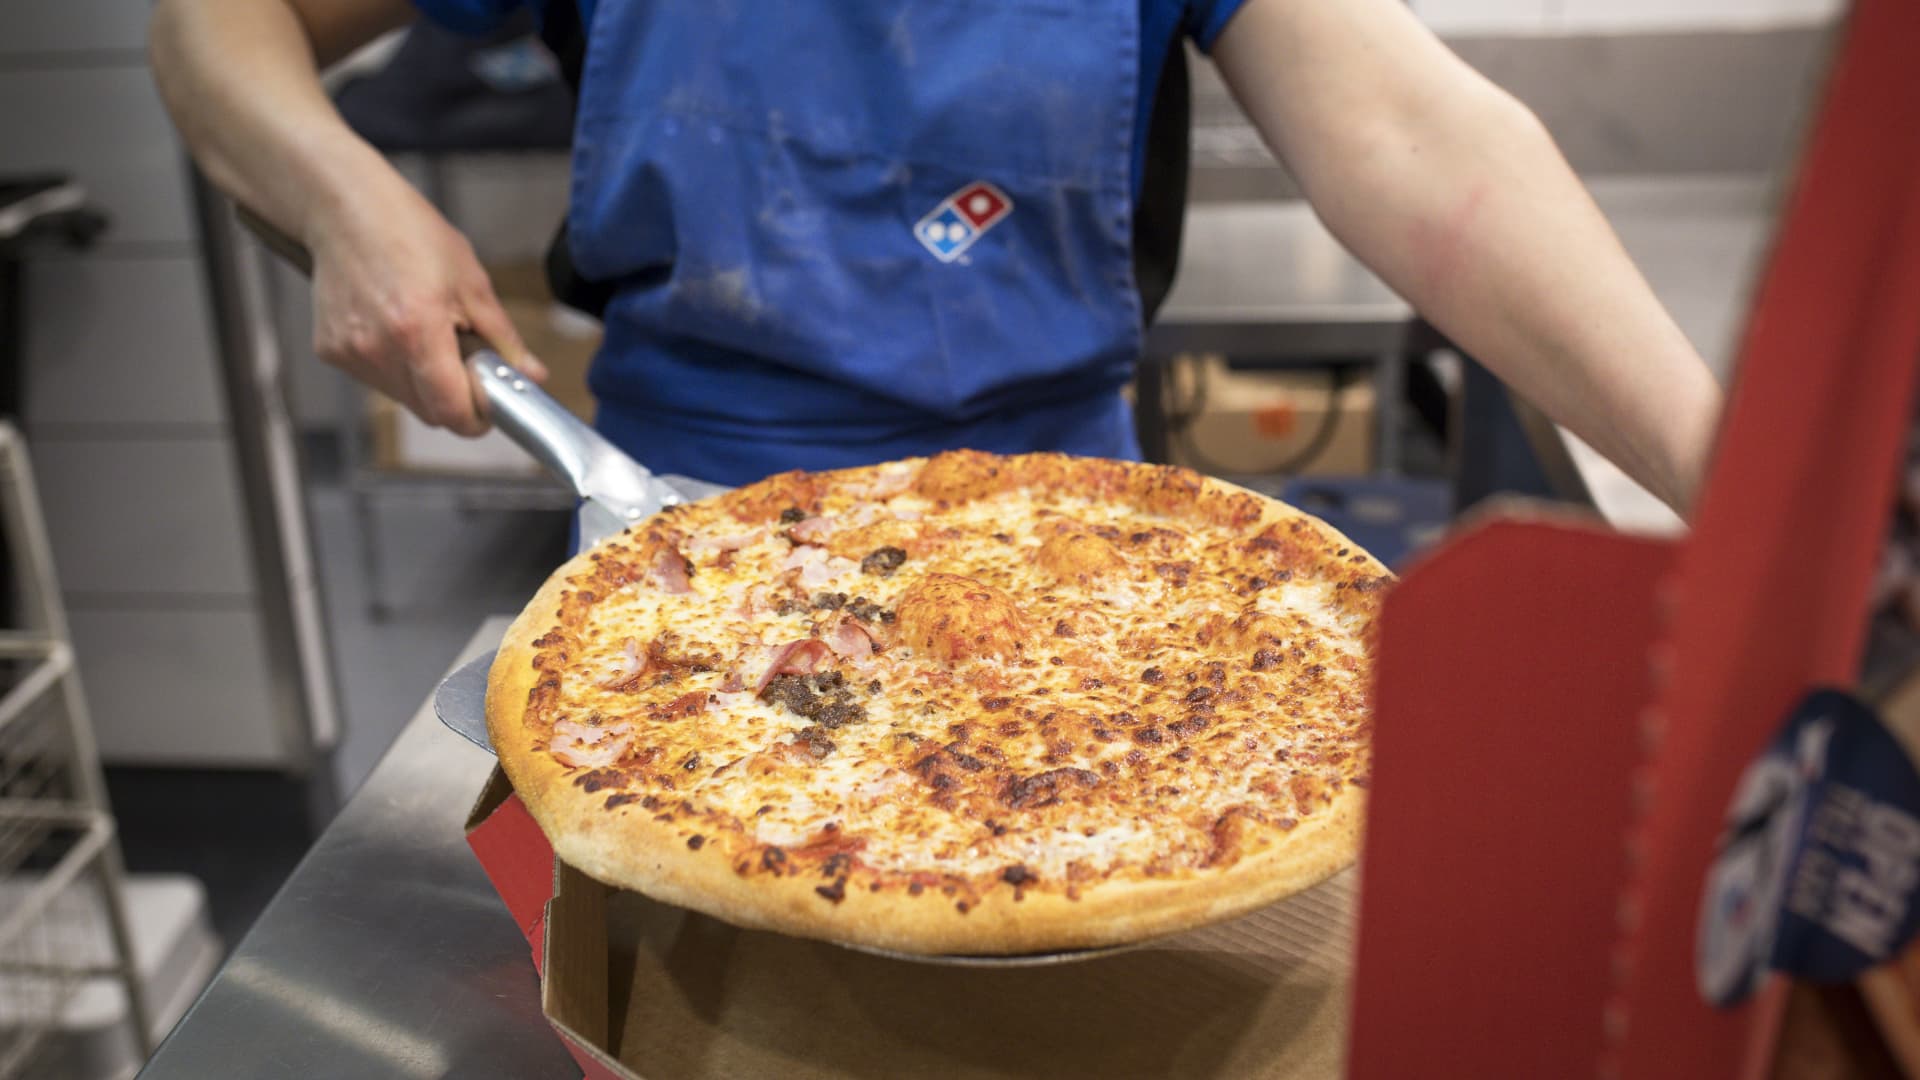 Domino’s Pizza (DPZ) Q2 2022 Earnings